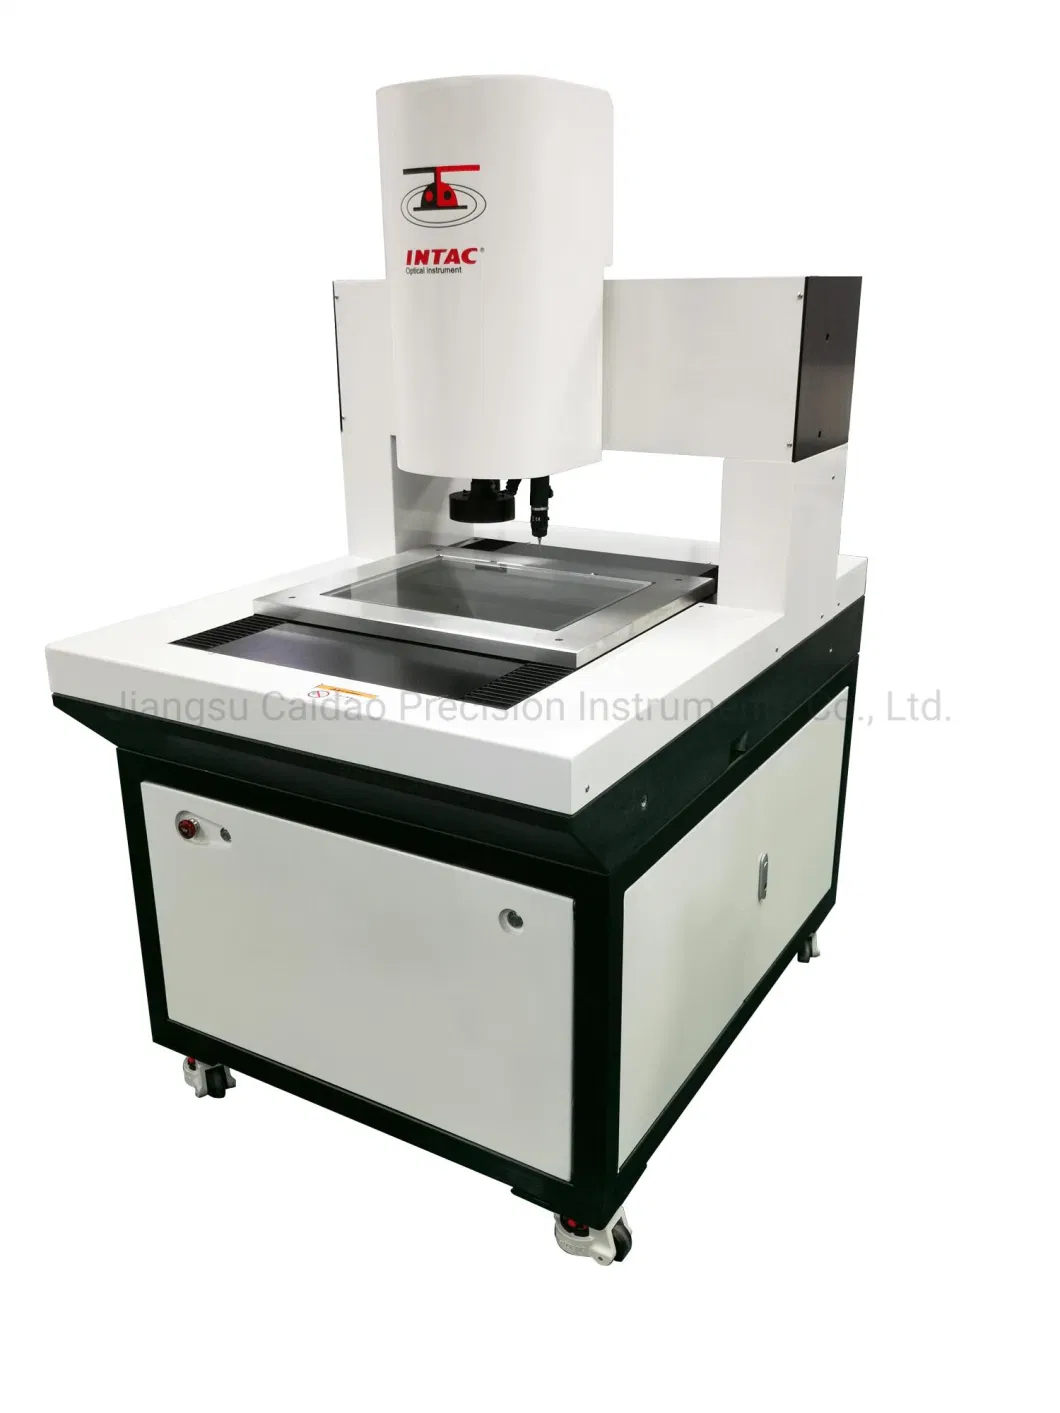 Automated Inspection Equipment with Professional Metrology Tech Newton 400h